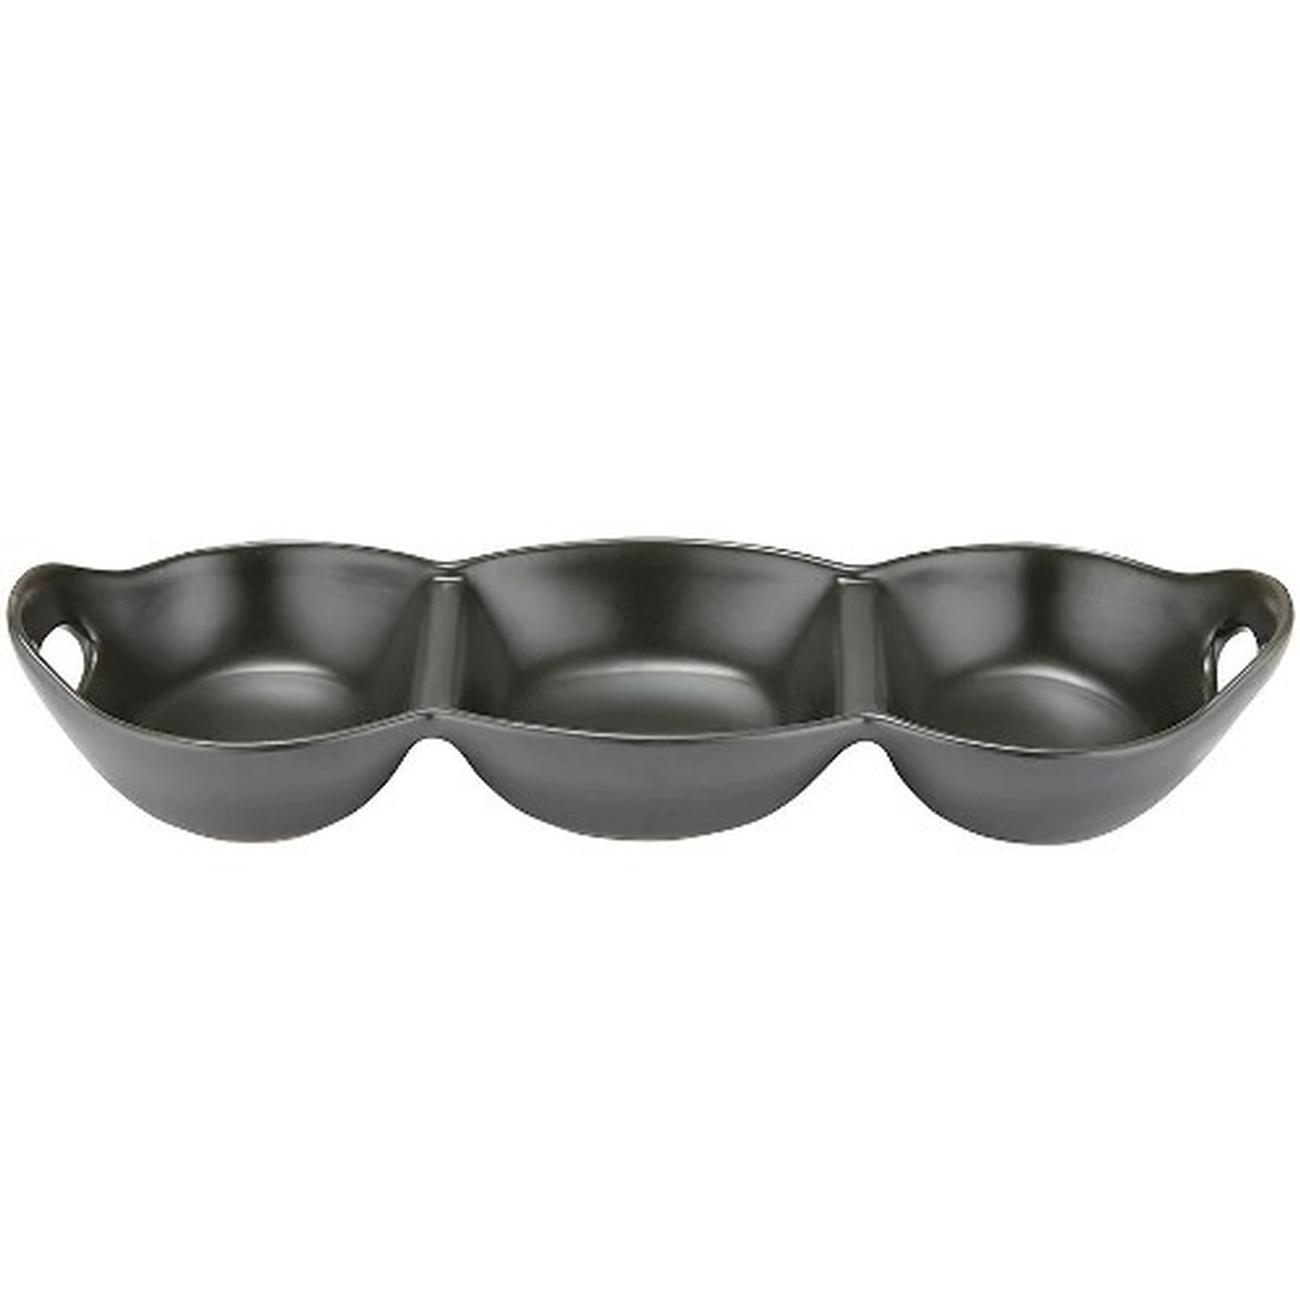 ladelle-host-three-part-handled-bowl-charcoal - Ladelle Host 3 Part Handled Bowl Charcoal